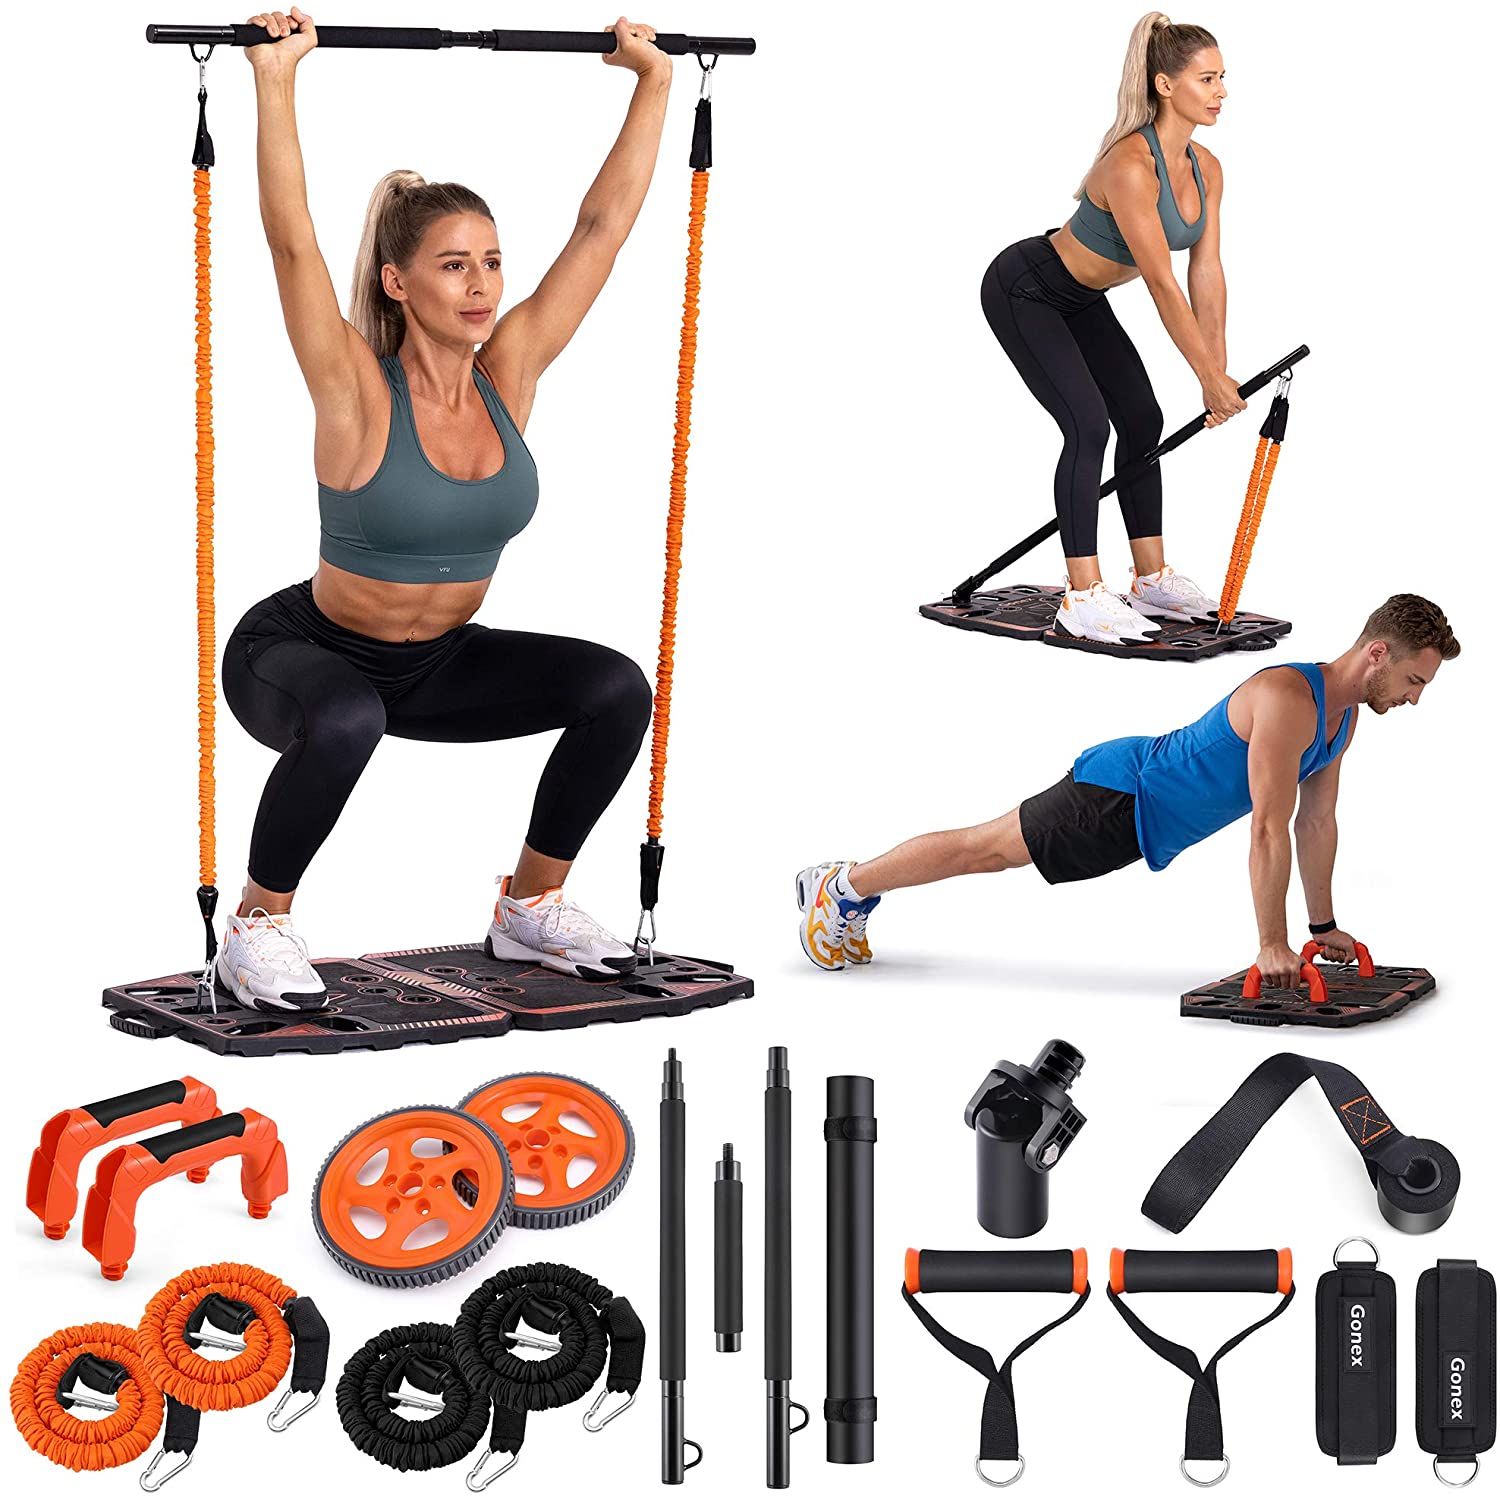 Review of Gonex Portable Home Gym Workout Equipment